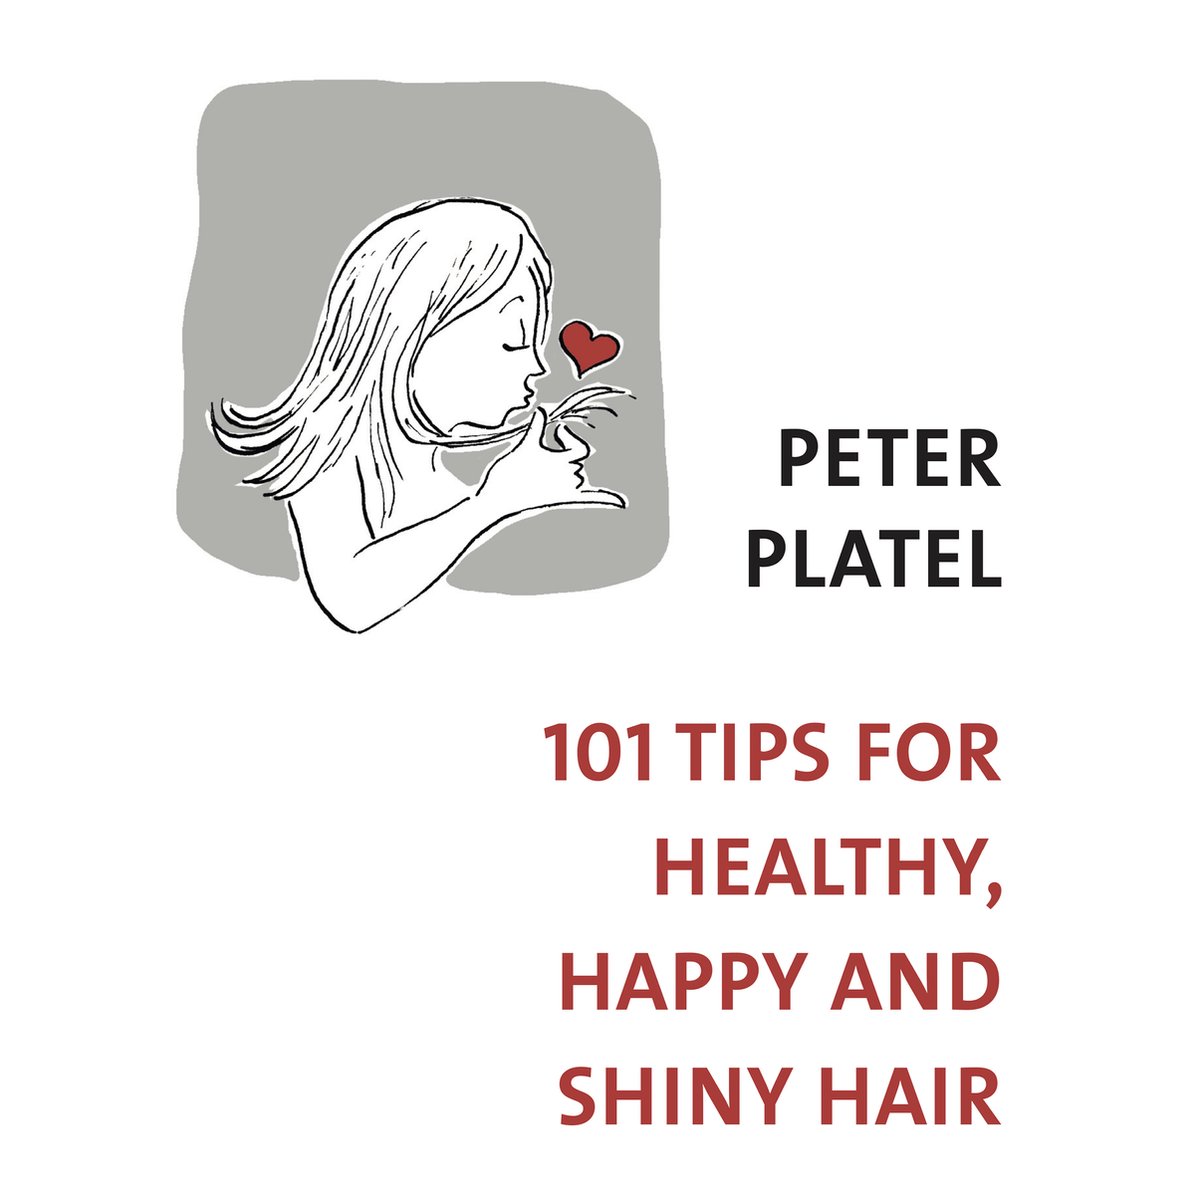 101 tips for happy, healthy and shiny hair